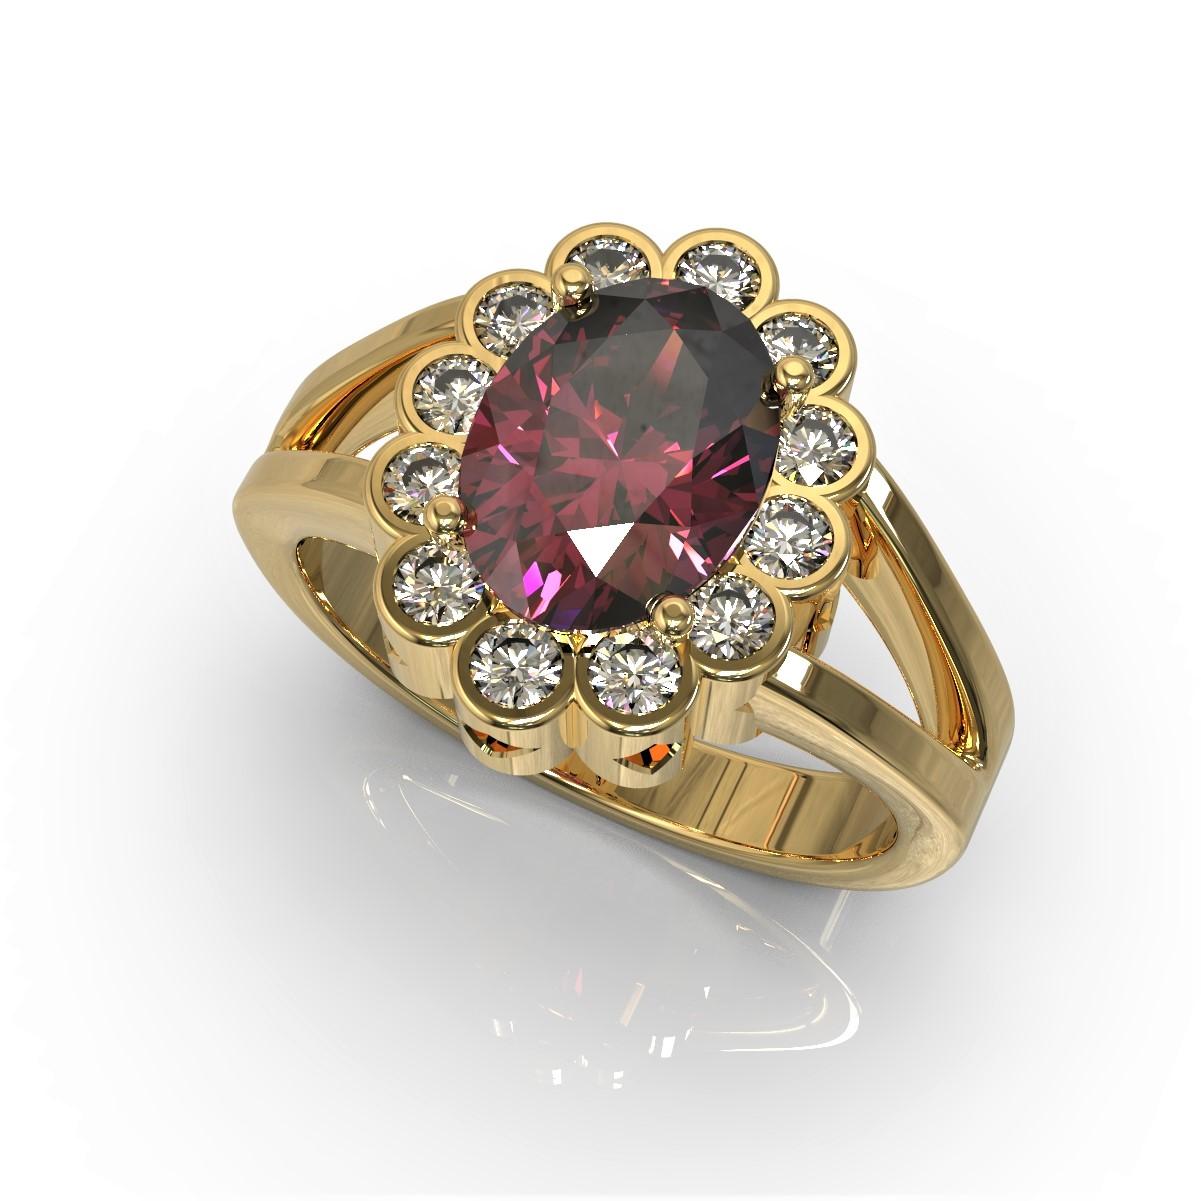 Rosa Ring

The exquisite 18 carat yellow gold ring features a stunning rhodolite garnet and round brilliant cut diamonds. 

Oval faceted rhodolite garnet: intense reddish pink colour, 2.06 Carat   8.87MM x 6.90MM x 4.49MM

Round brilliant cut